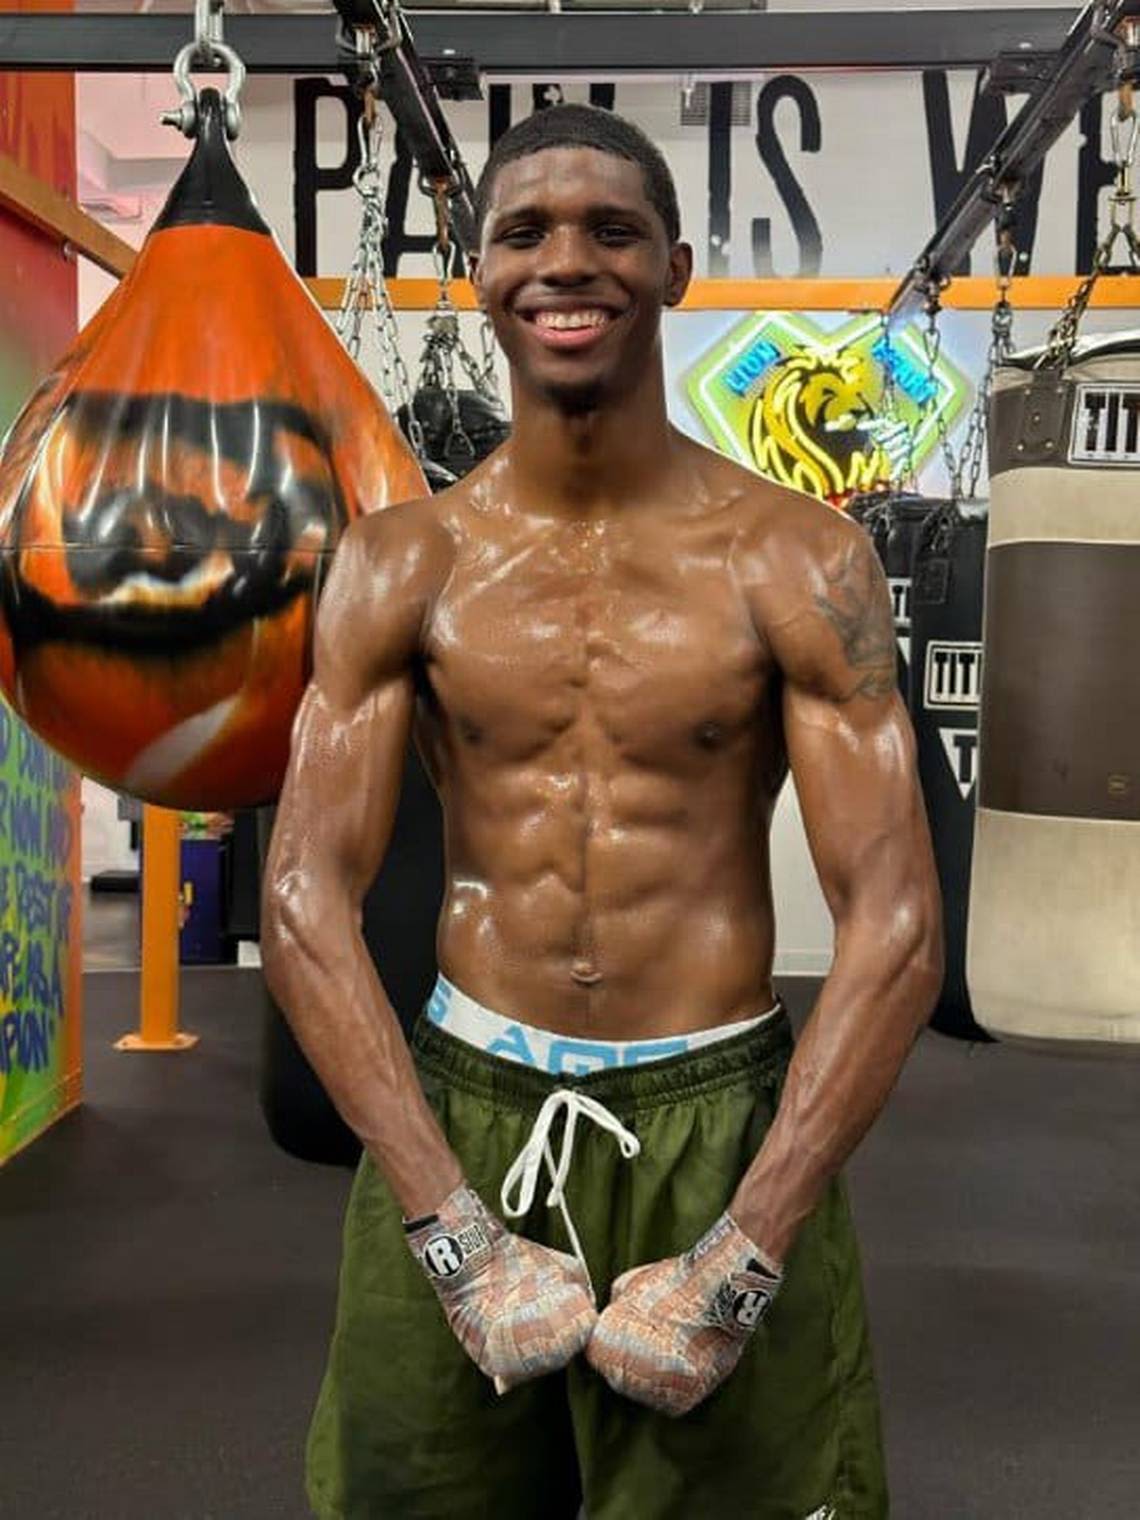 Miami-based boxer with a Master’s degree seen as a ‘rare breed’